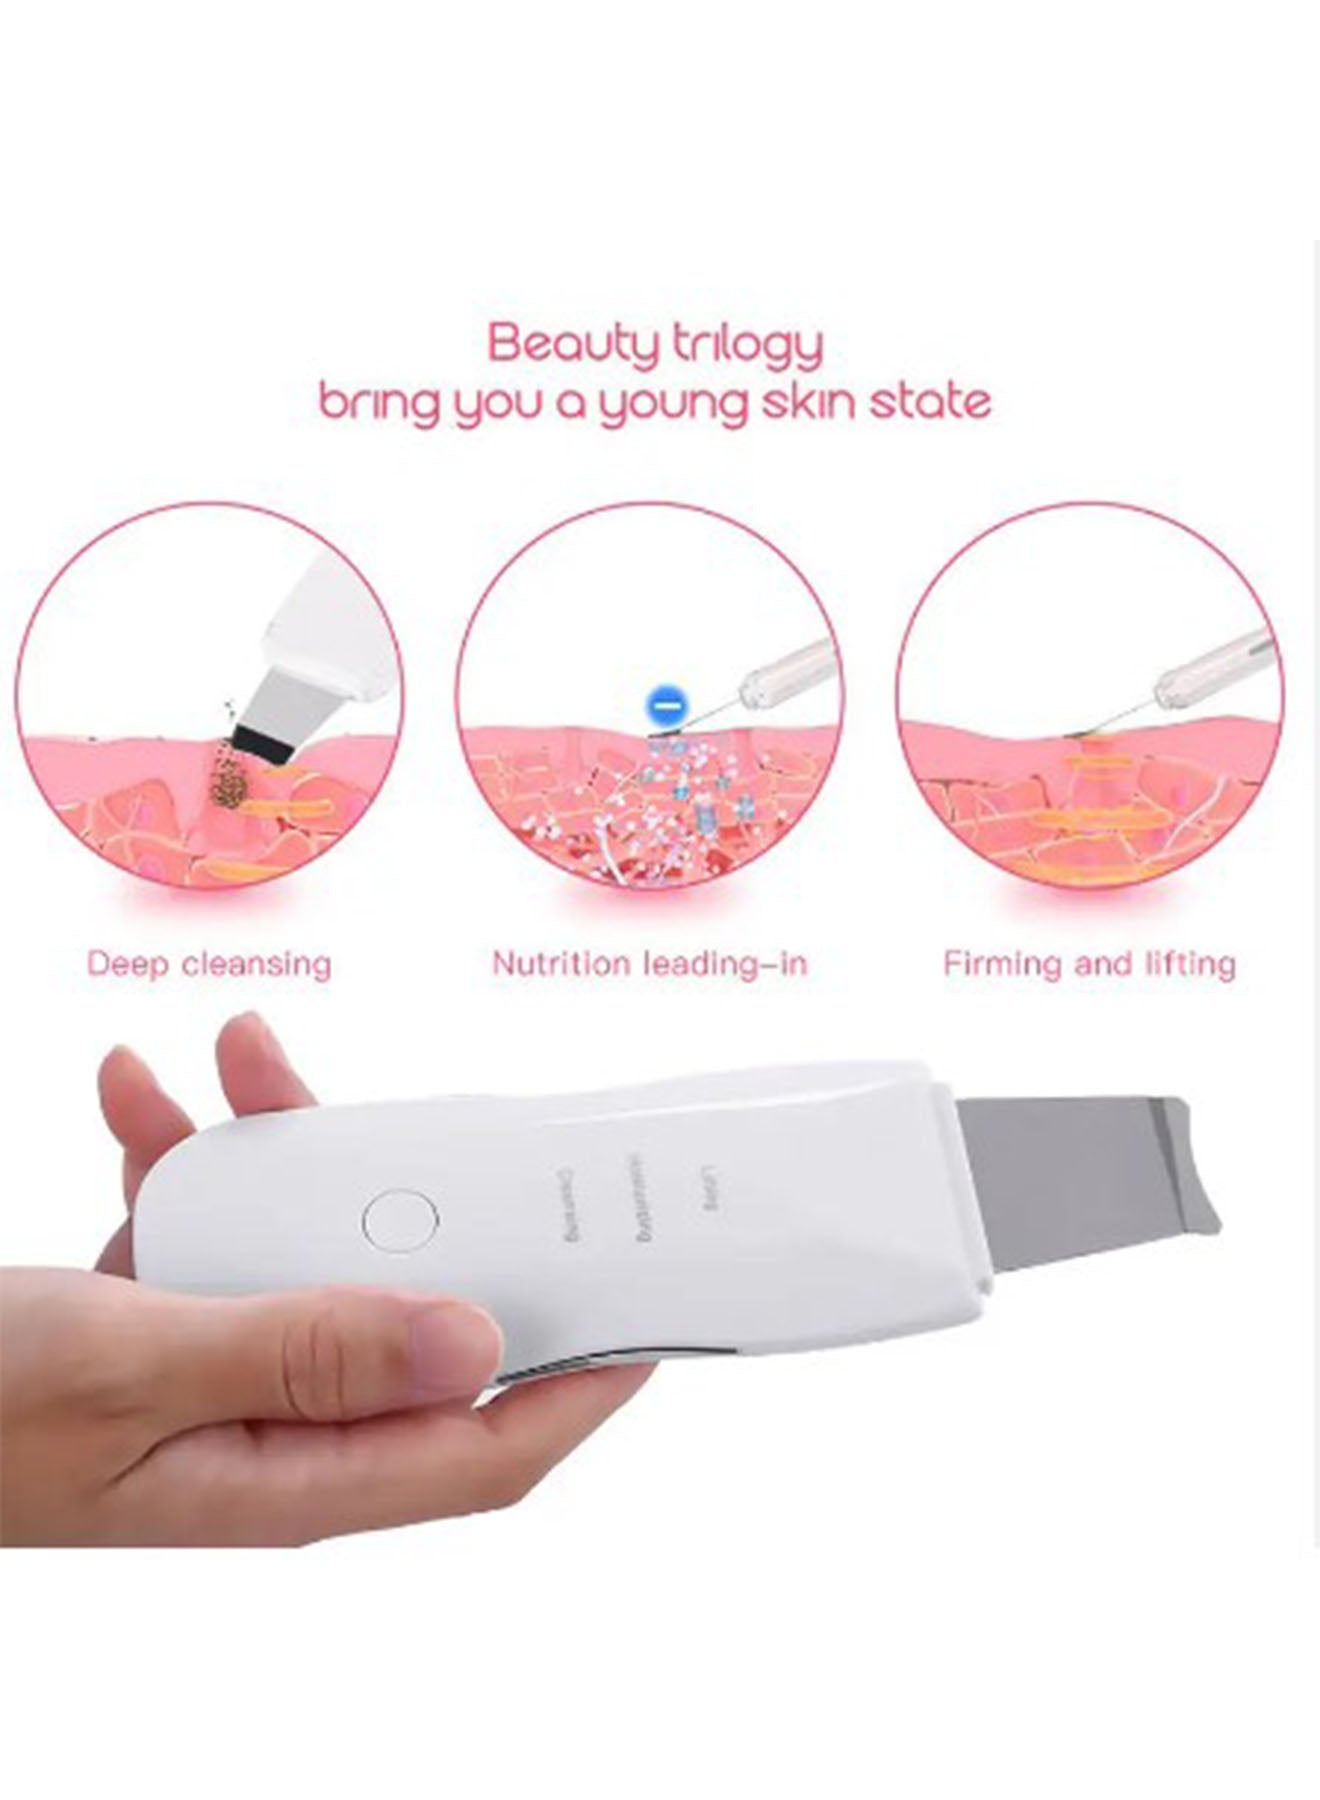 DANIM Face Blackhead Remover Cleaner Beauty Personal Care Facial Dead Skin Electric Boby Skin Care Tool Shake Clean Skin Scrubber DIY Face Ultrasonic Skin Scrubber DEEP CLEANSING